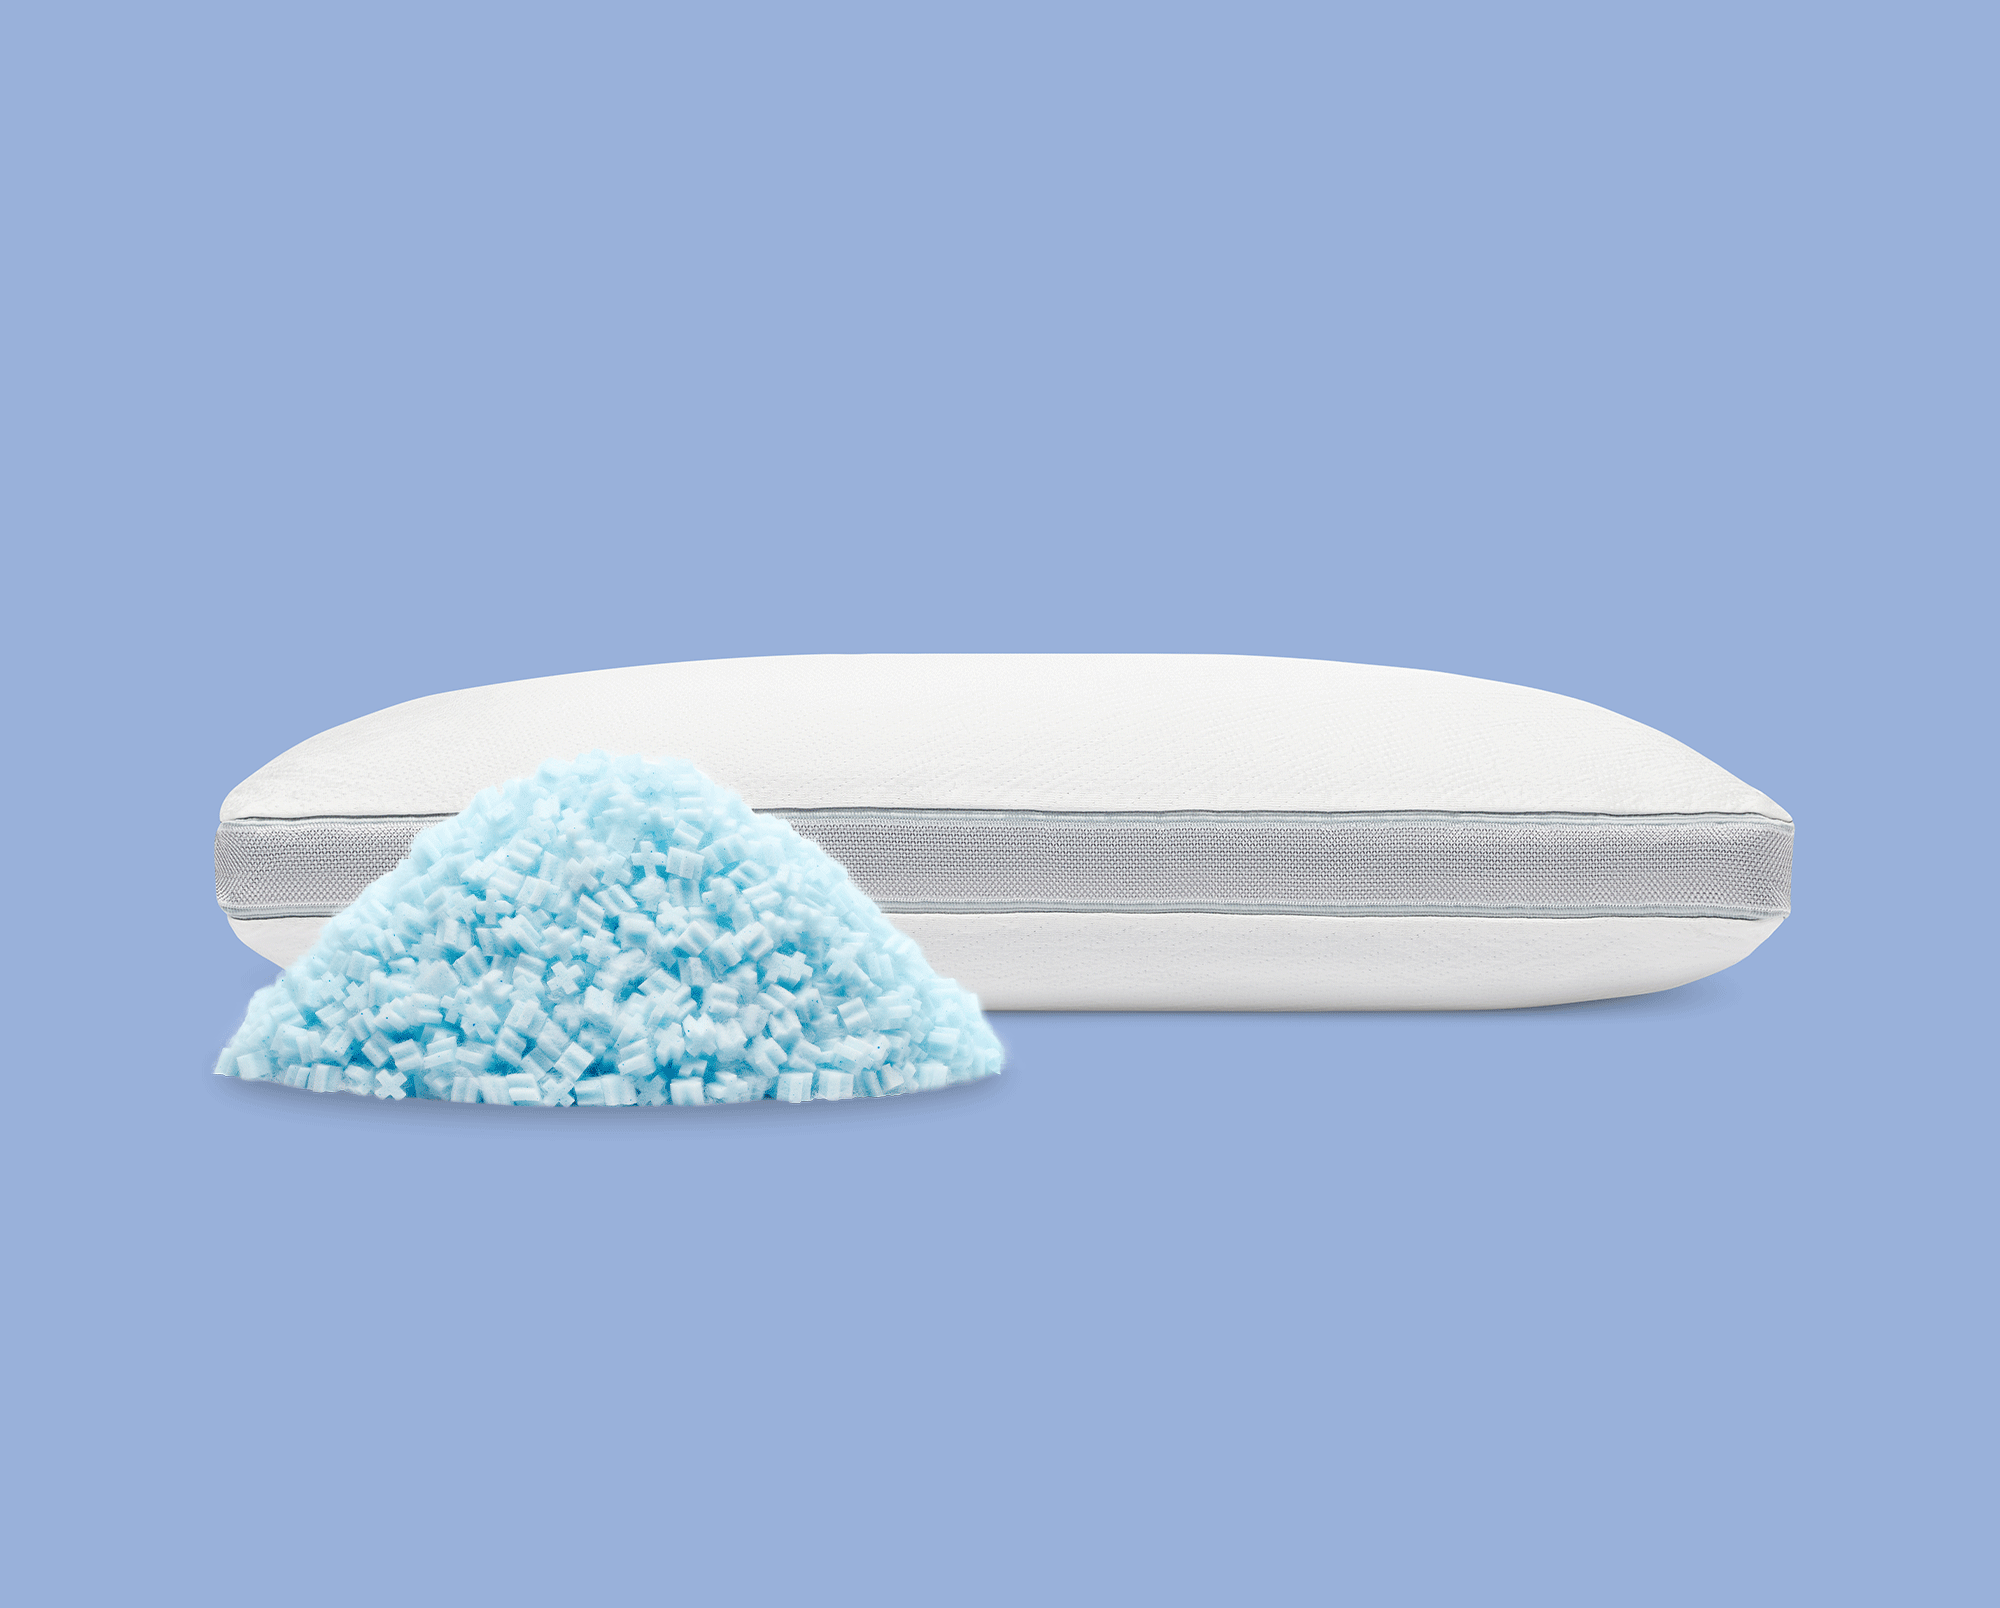 Coop Home Goods Extra Oomph Cool+ Pillow Fill, Gel-Infused, Plus Shaped Memory Foam Filling for More Airflow, 1/2 Pound Filler for Eden Cool+